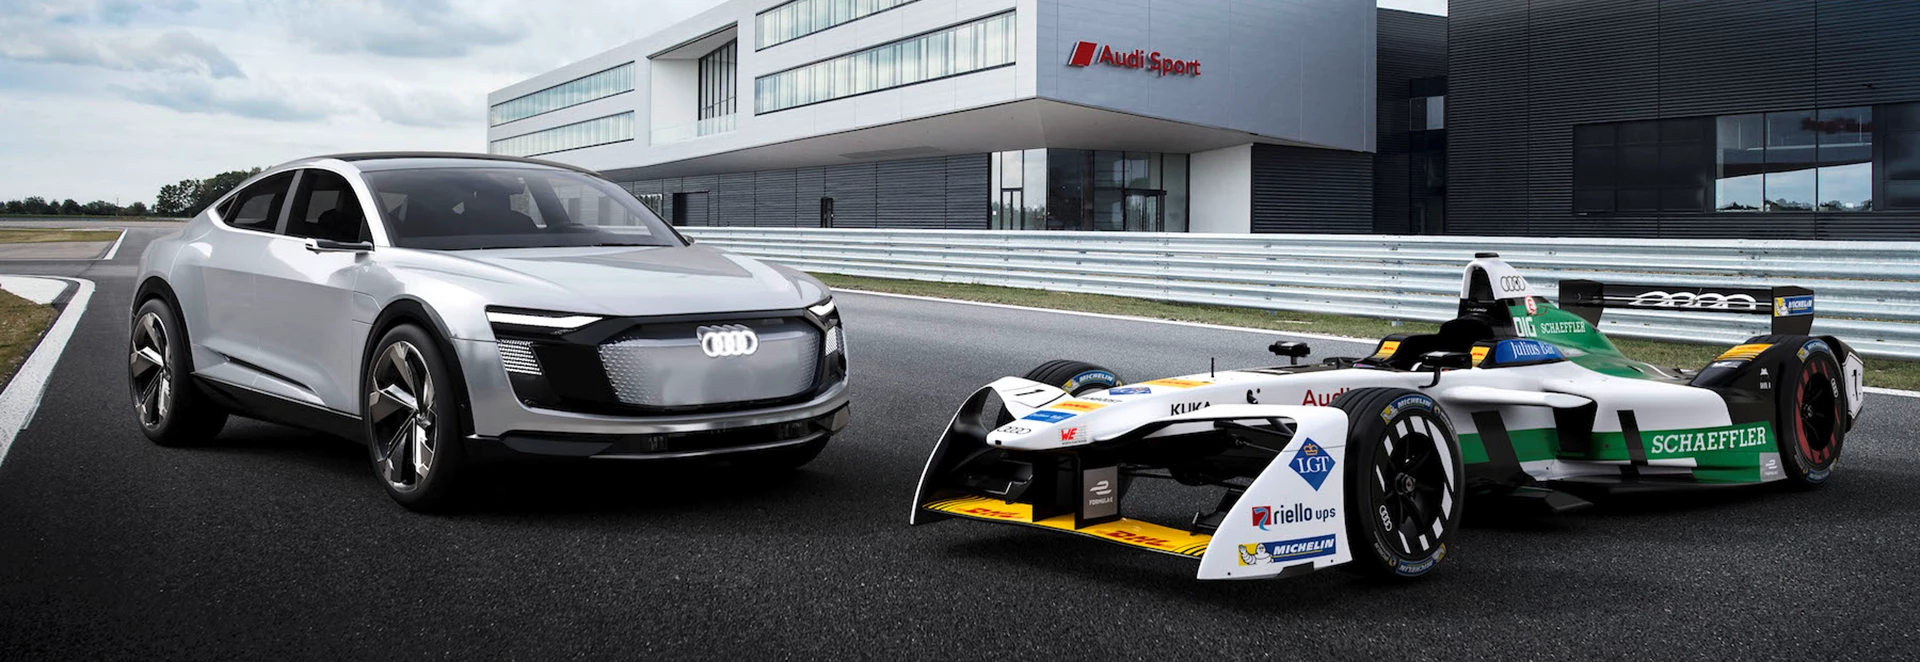 Audi reveals first all-electric factory race car for Formula E 